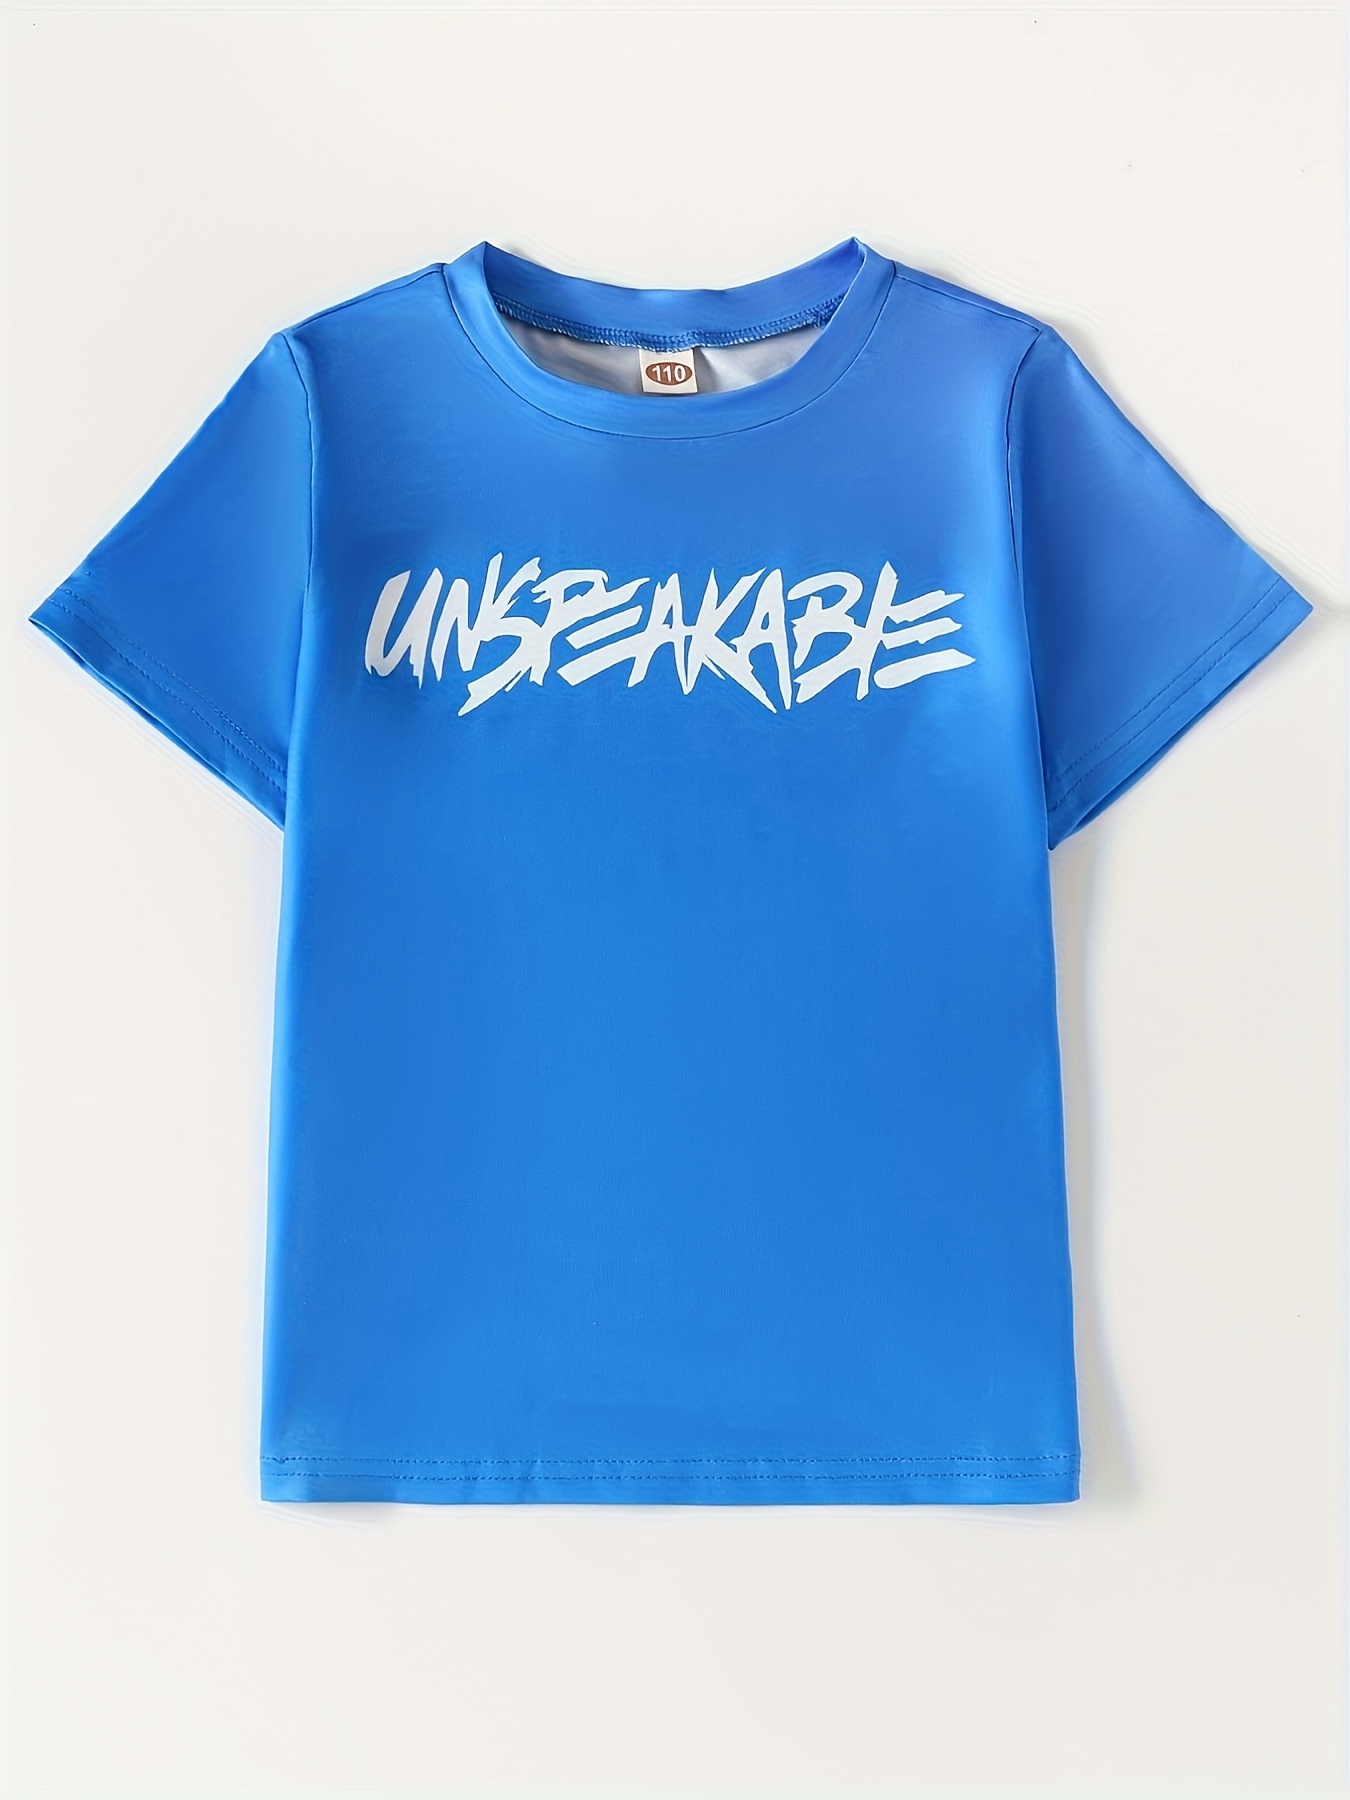 boys t shirts unspeakable tops fashion youth funny tee shirts t shirt for kids